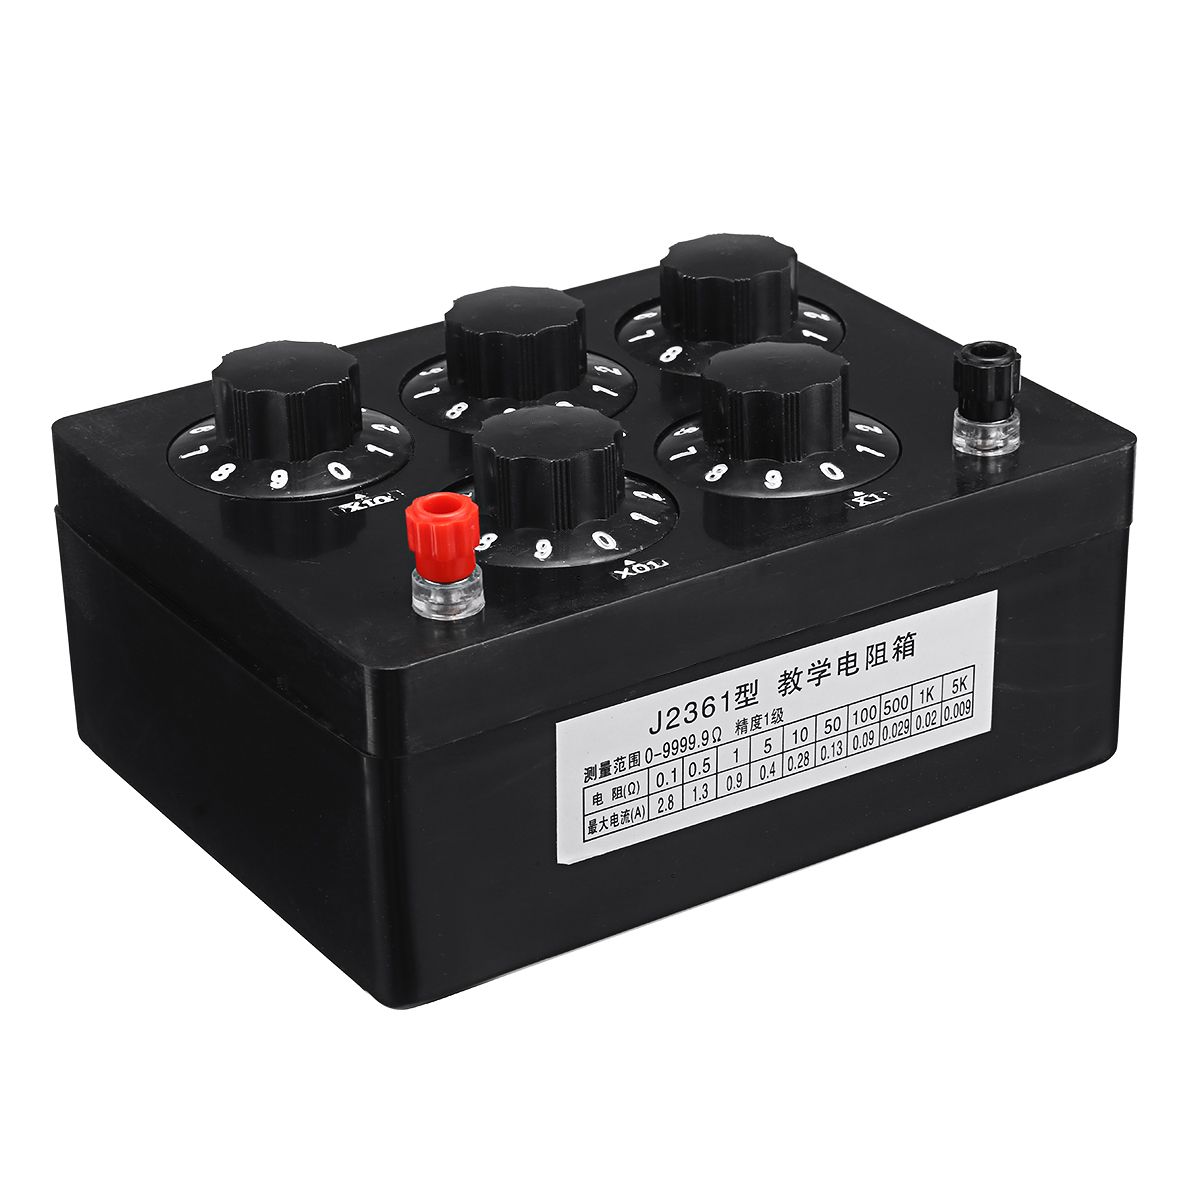 0-99999Omega-Variable-Resistor-Substitution-Box-Ohm-Adjustable-Substitution-Resistance-Knob-Switch-P-1443989